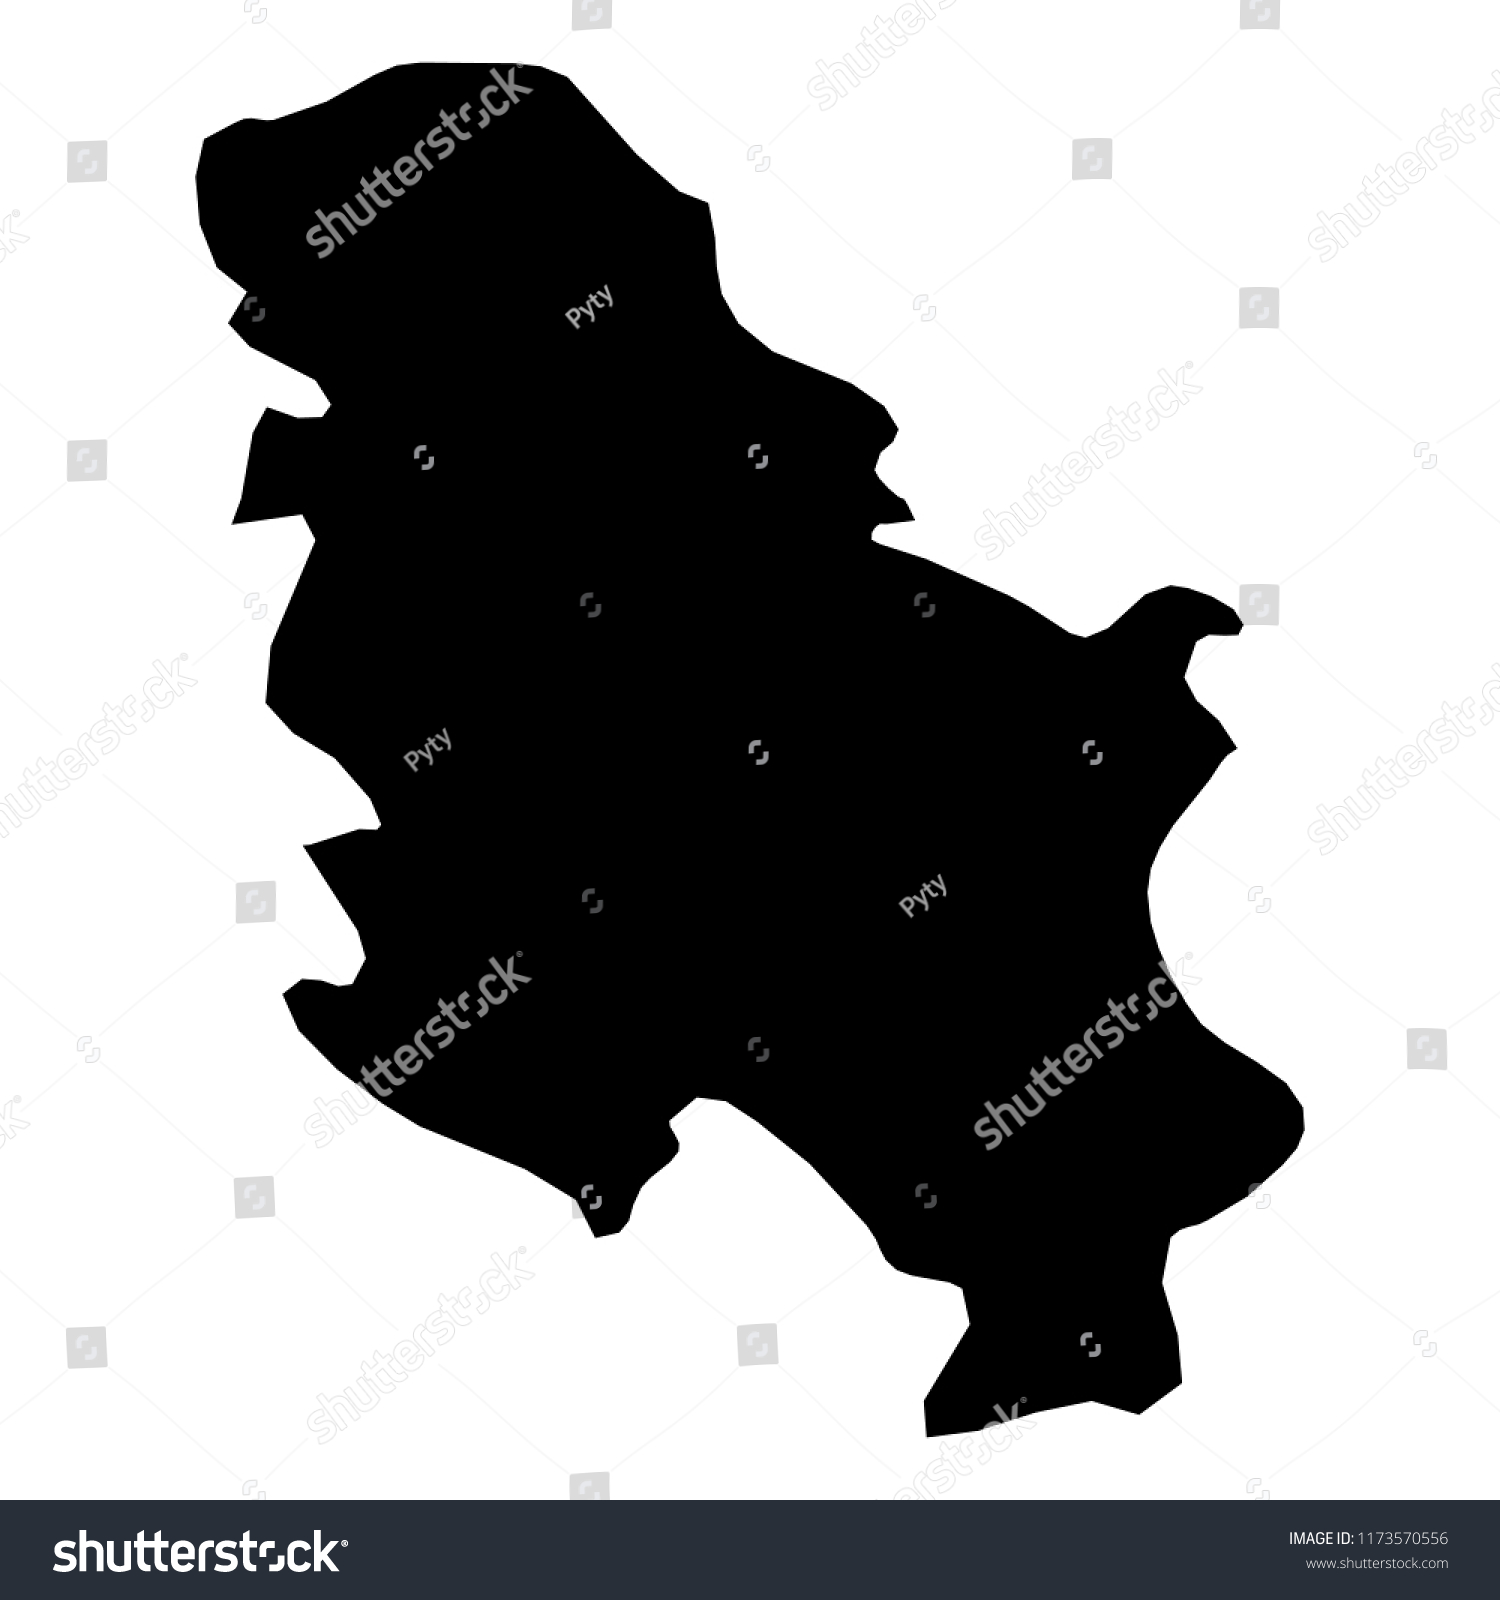 Serbia - solid black silhouette map of country area. Simple flat vector illustration. #1173570556